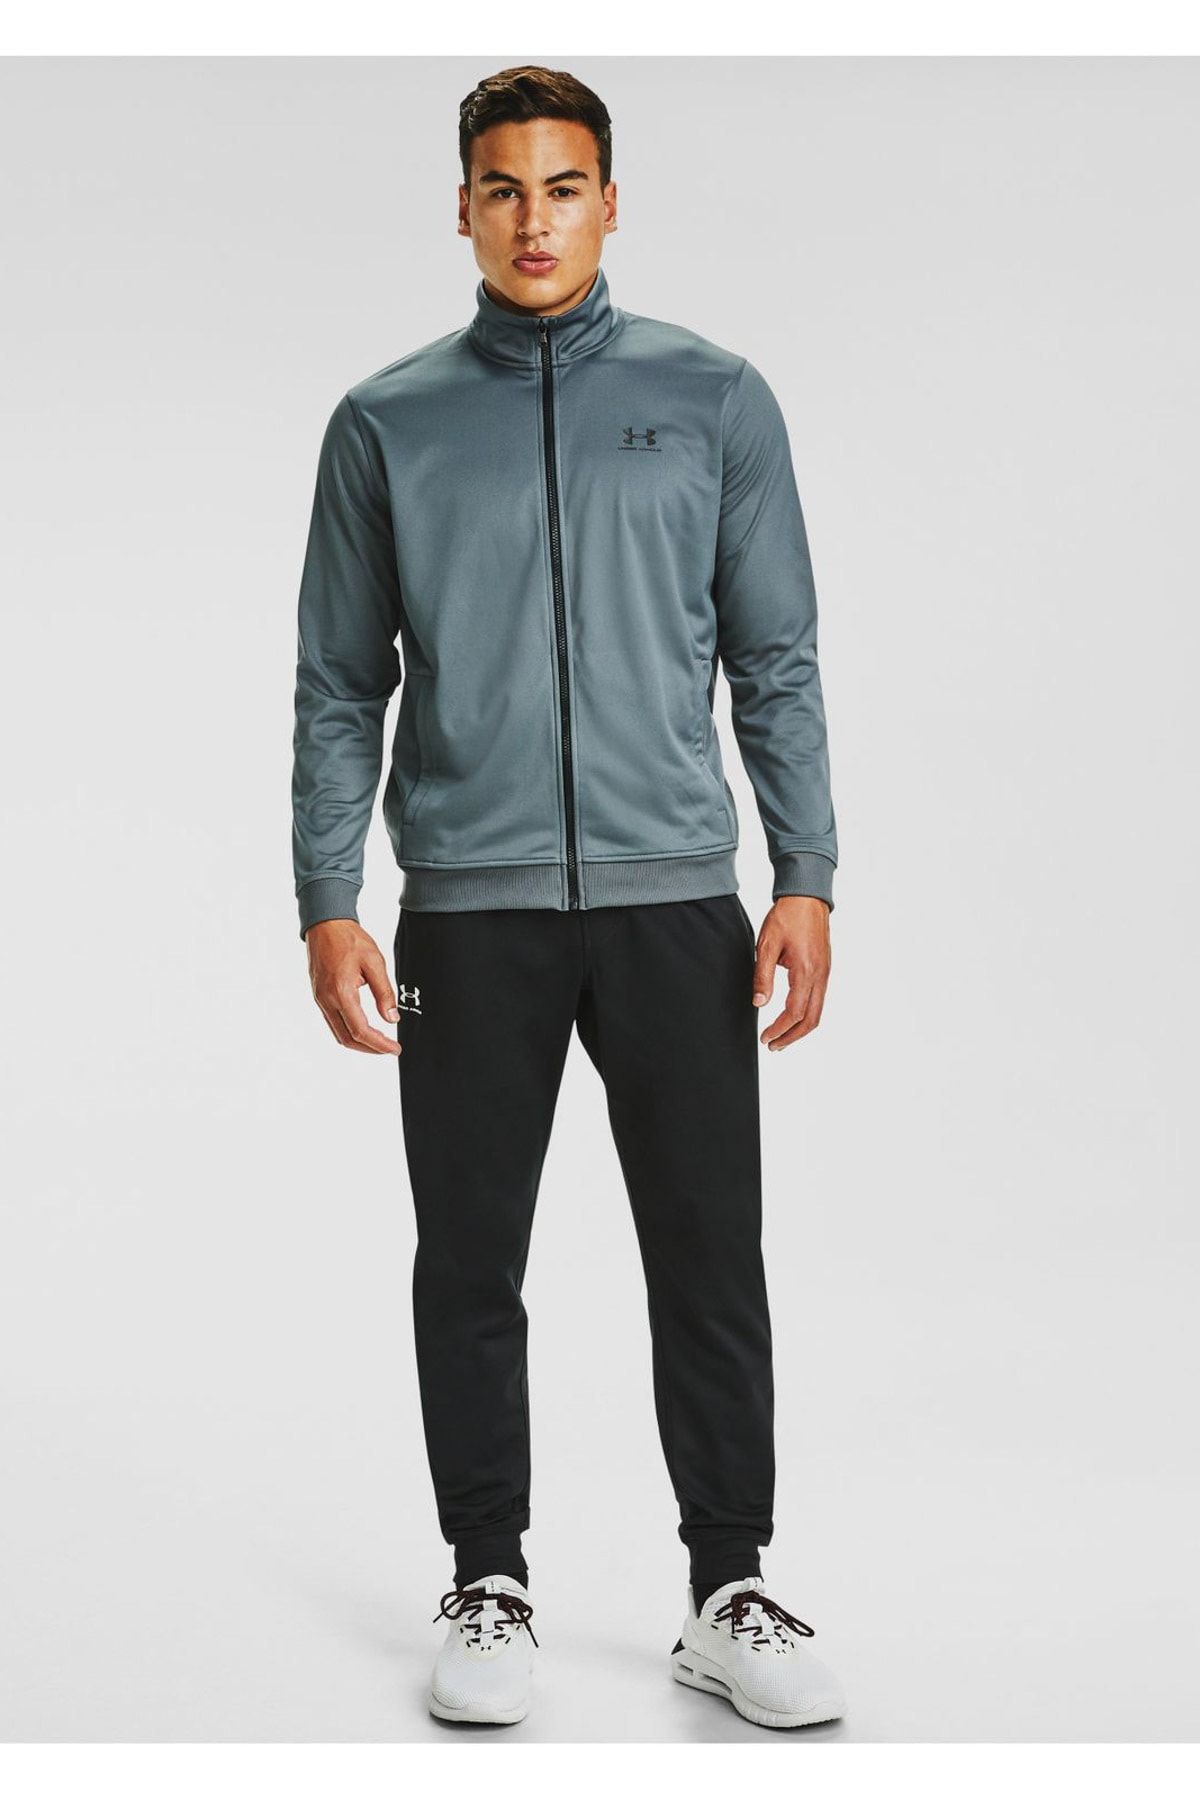 Under Armour Sportstyle Tricot Jacket 1329293-012